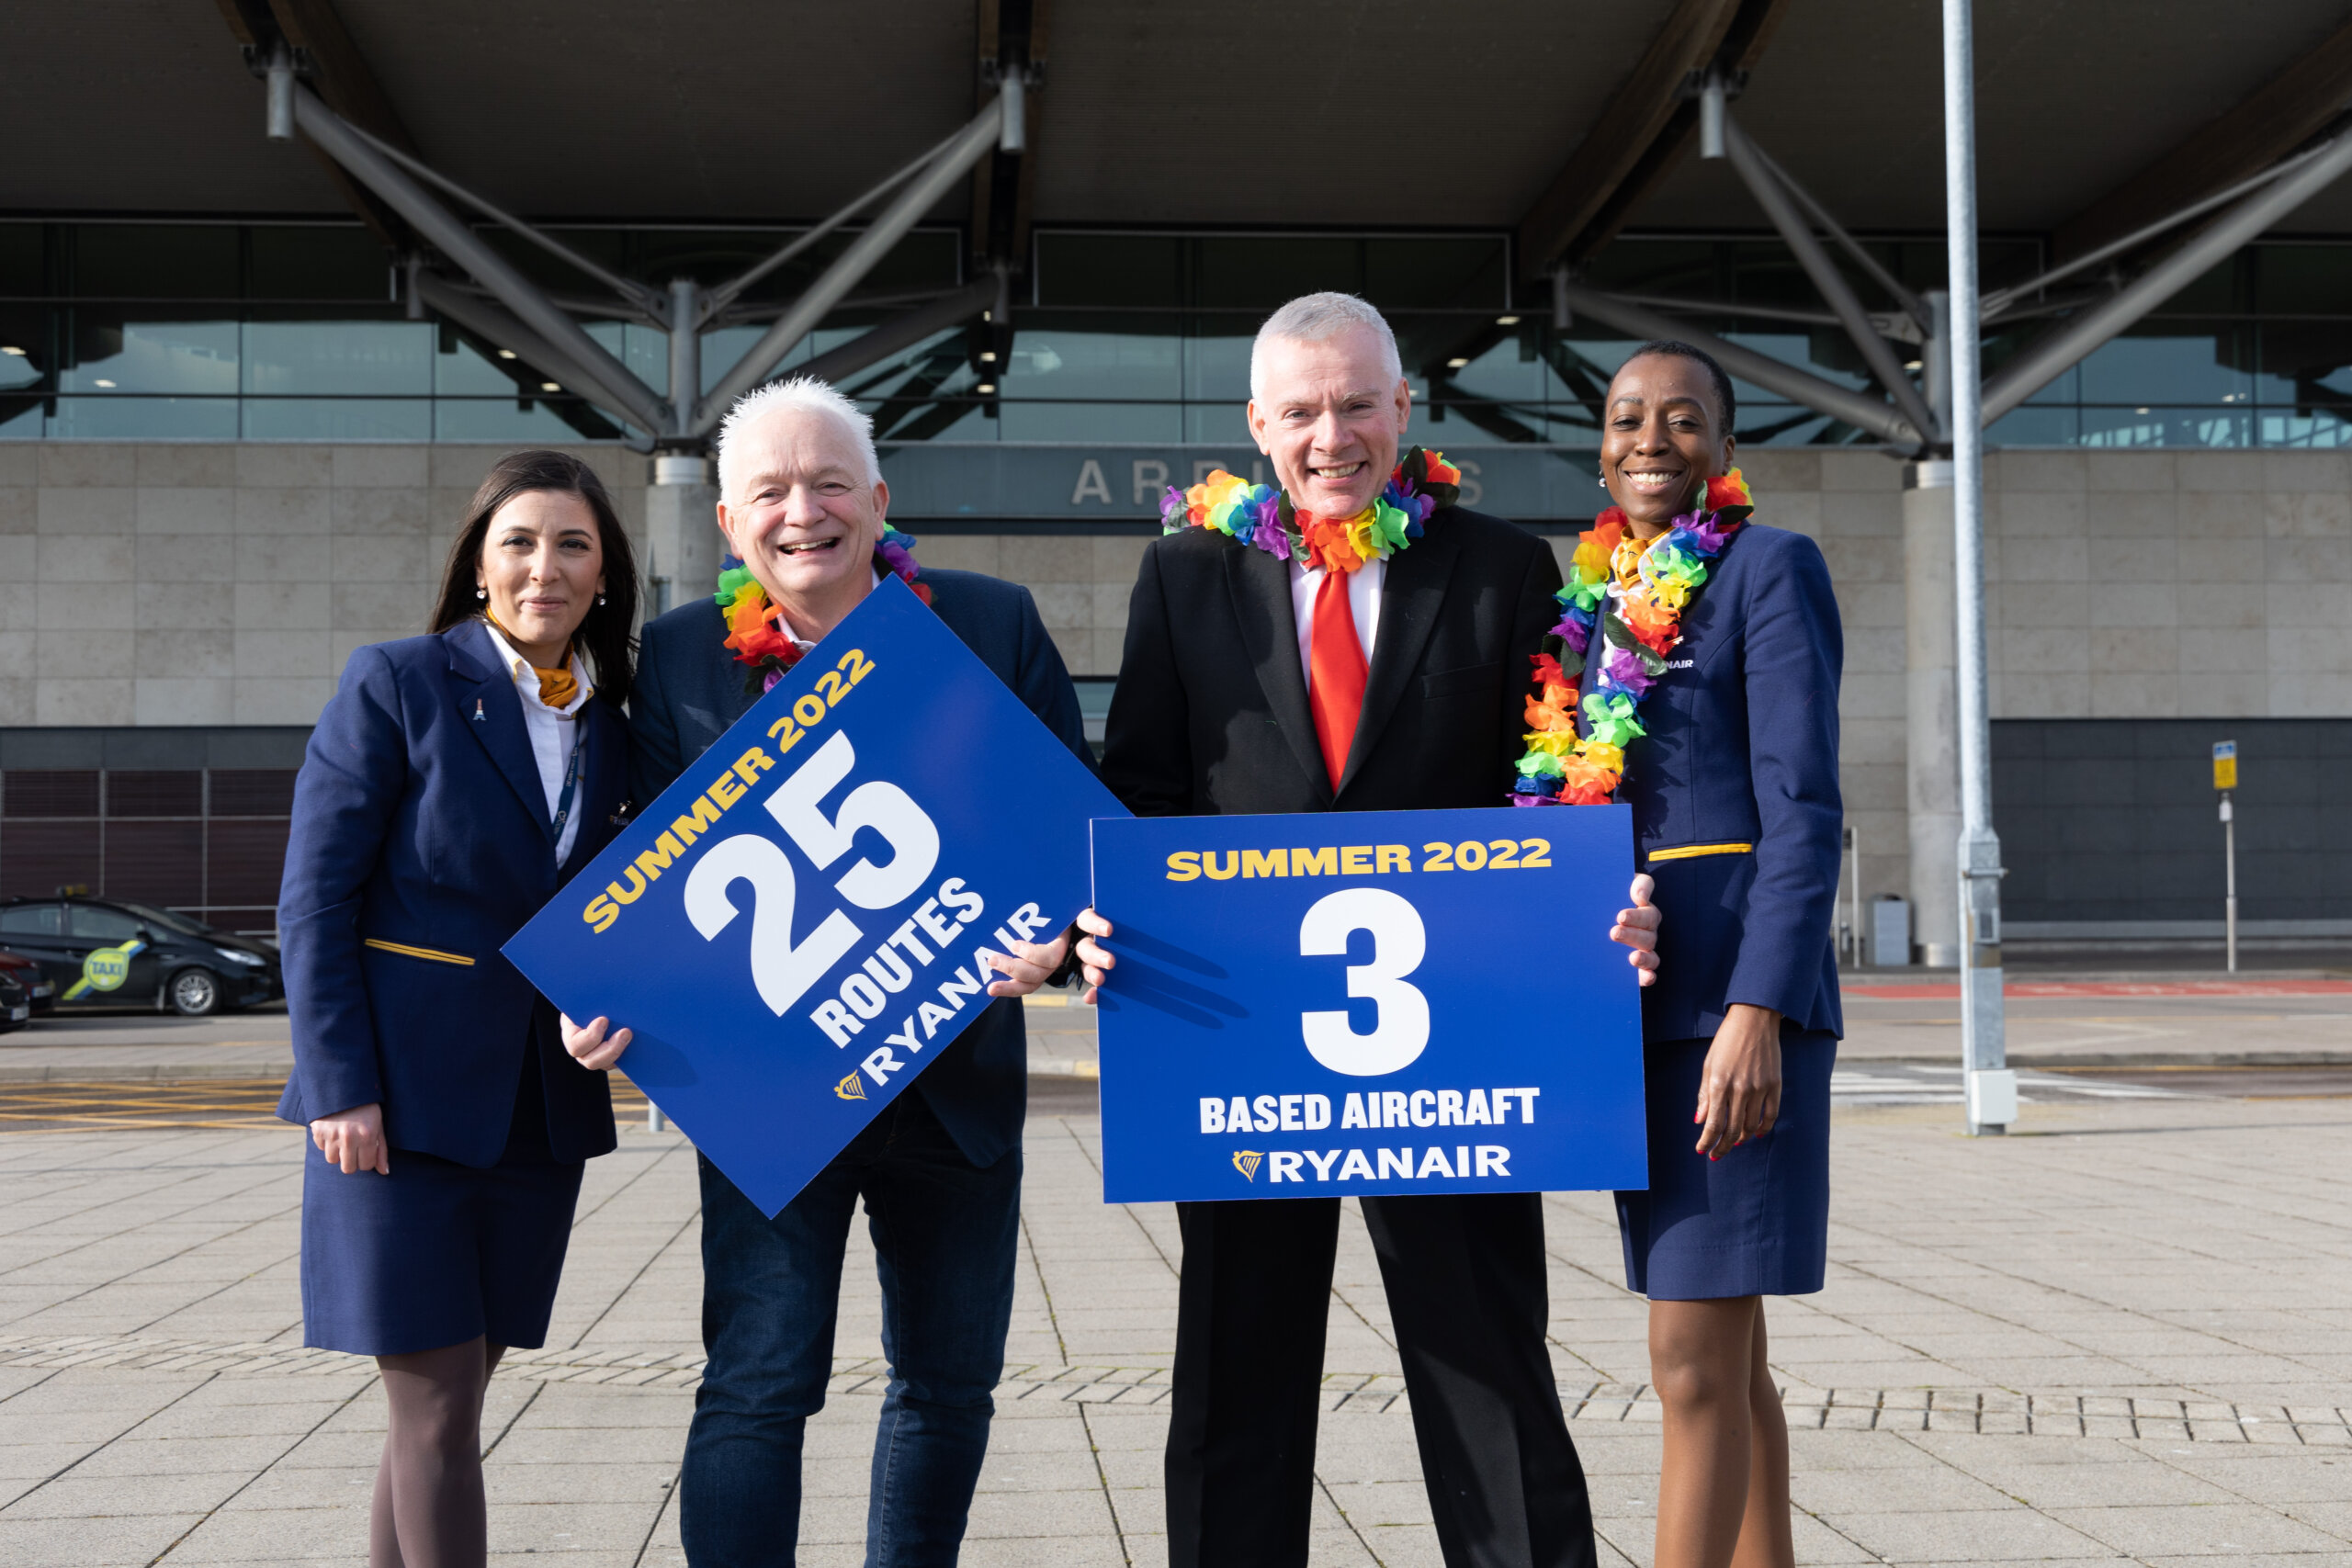 Ryanair Launches Largest Ever Cork Summer Schedule Announcing 3rd Based Aircraft At Cork Airport